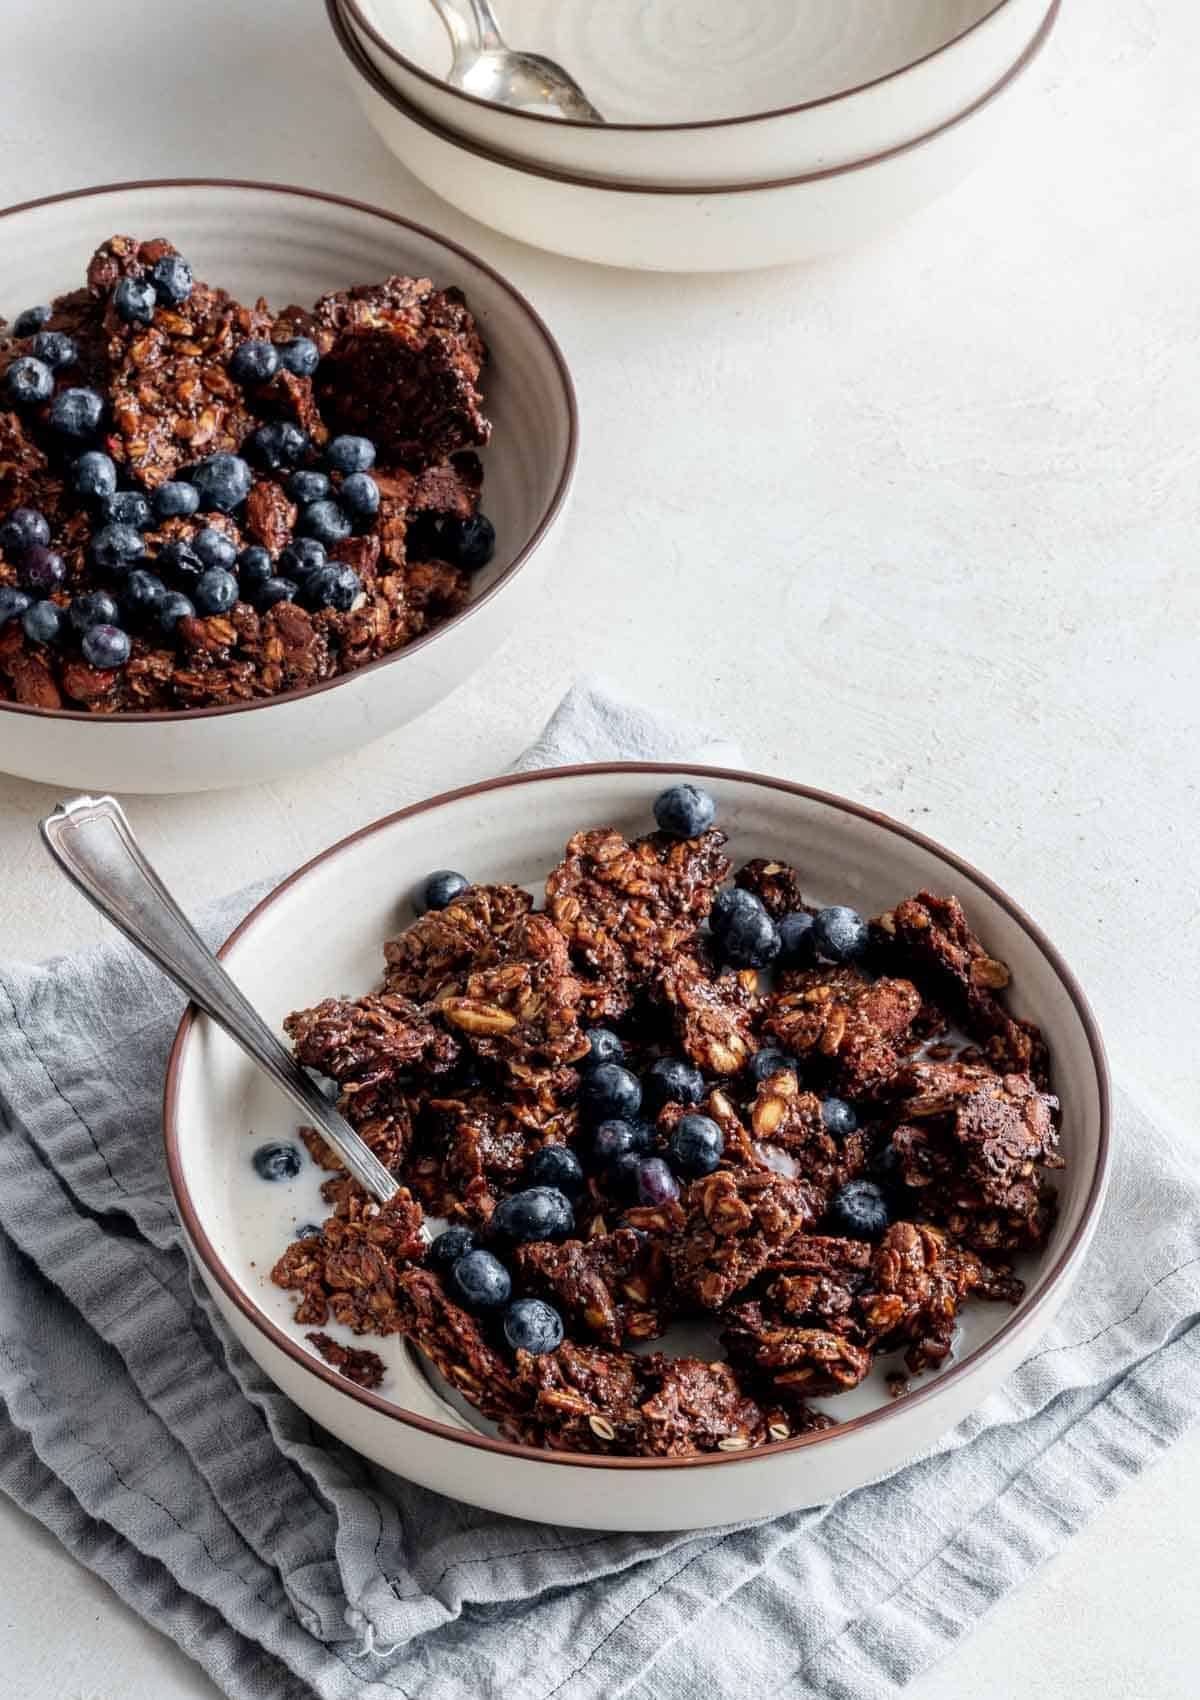 Brown granola with blueberries on top, in a white bowl with a spoon.